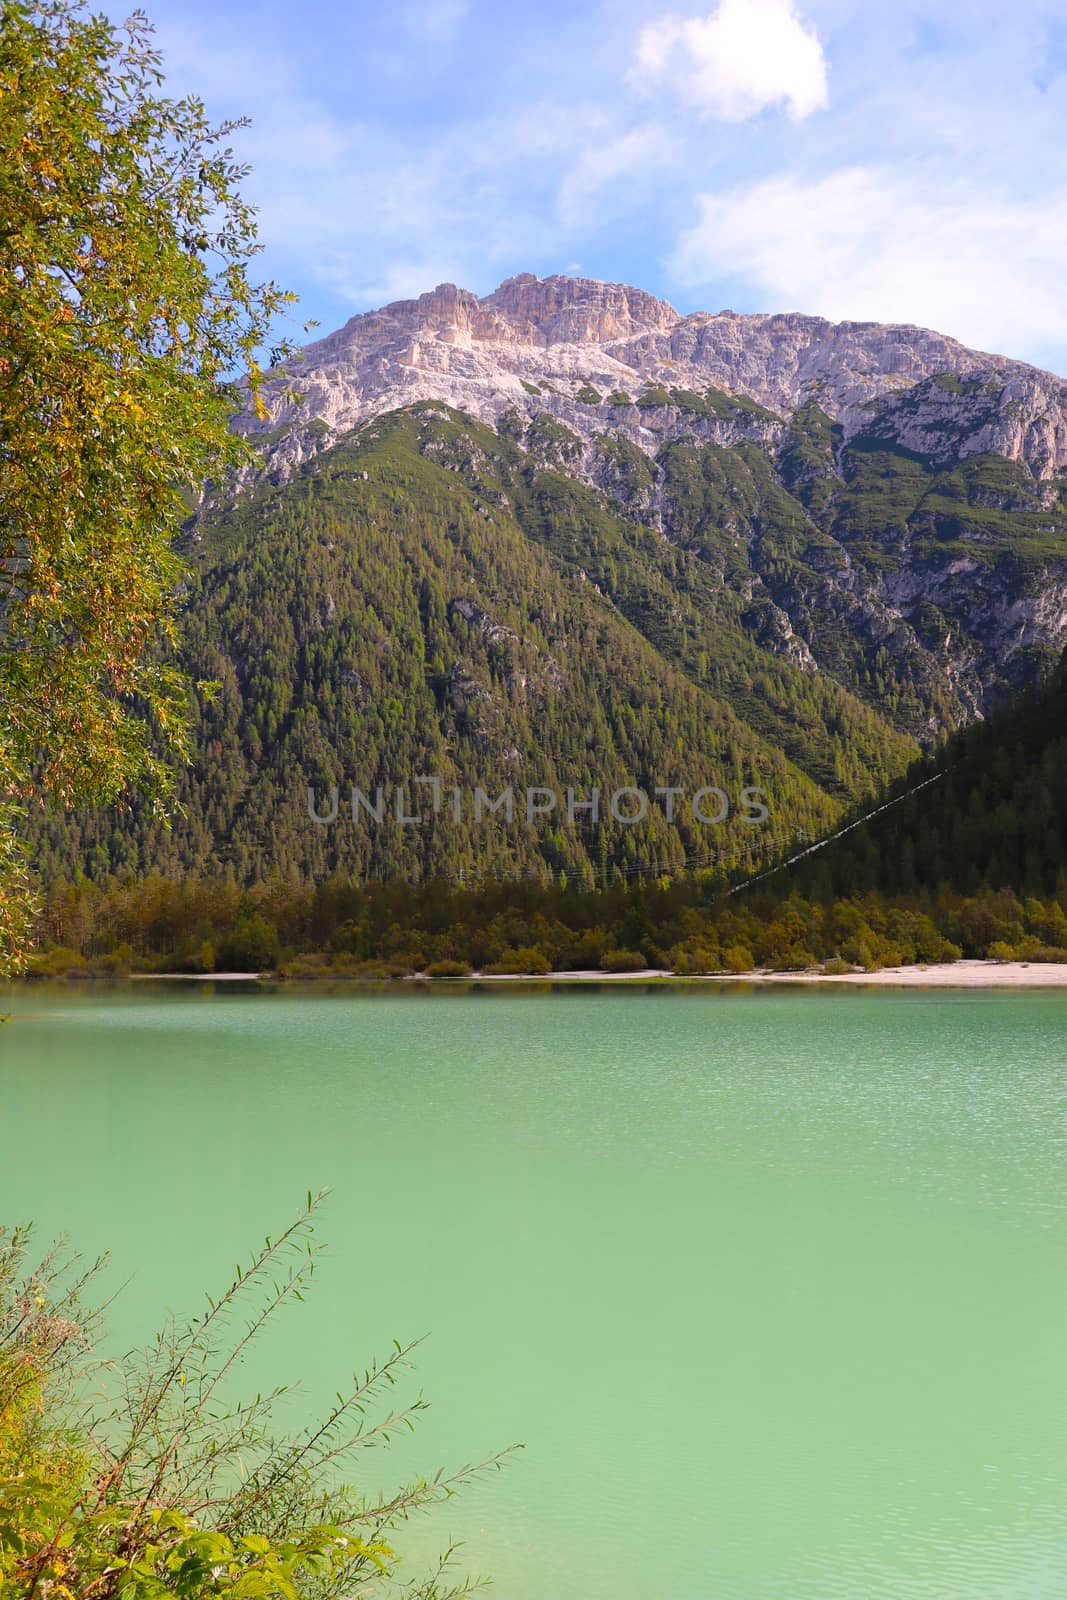 Lago di Landro Durrensee in the Dolomites in Italy. Out of focus. by kip02kas